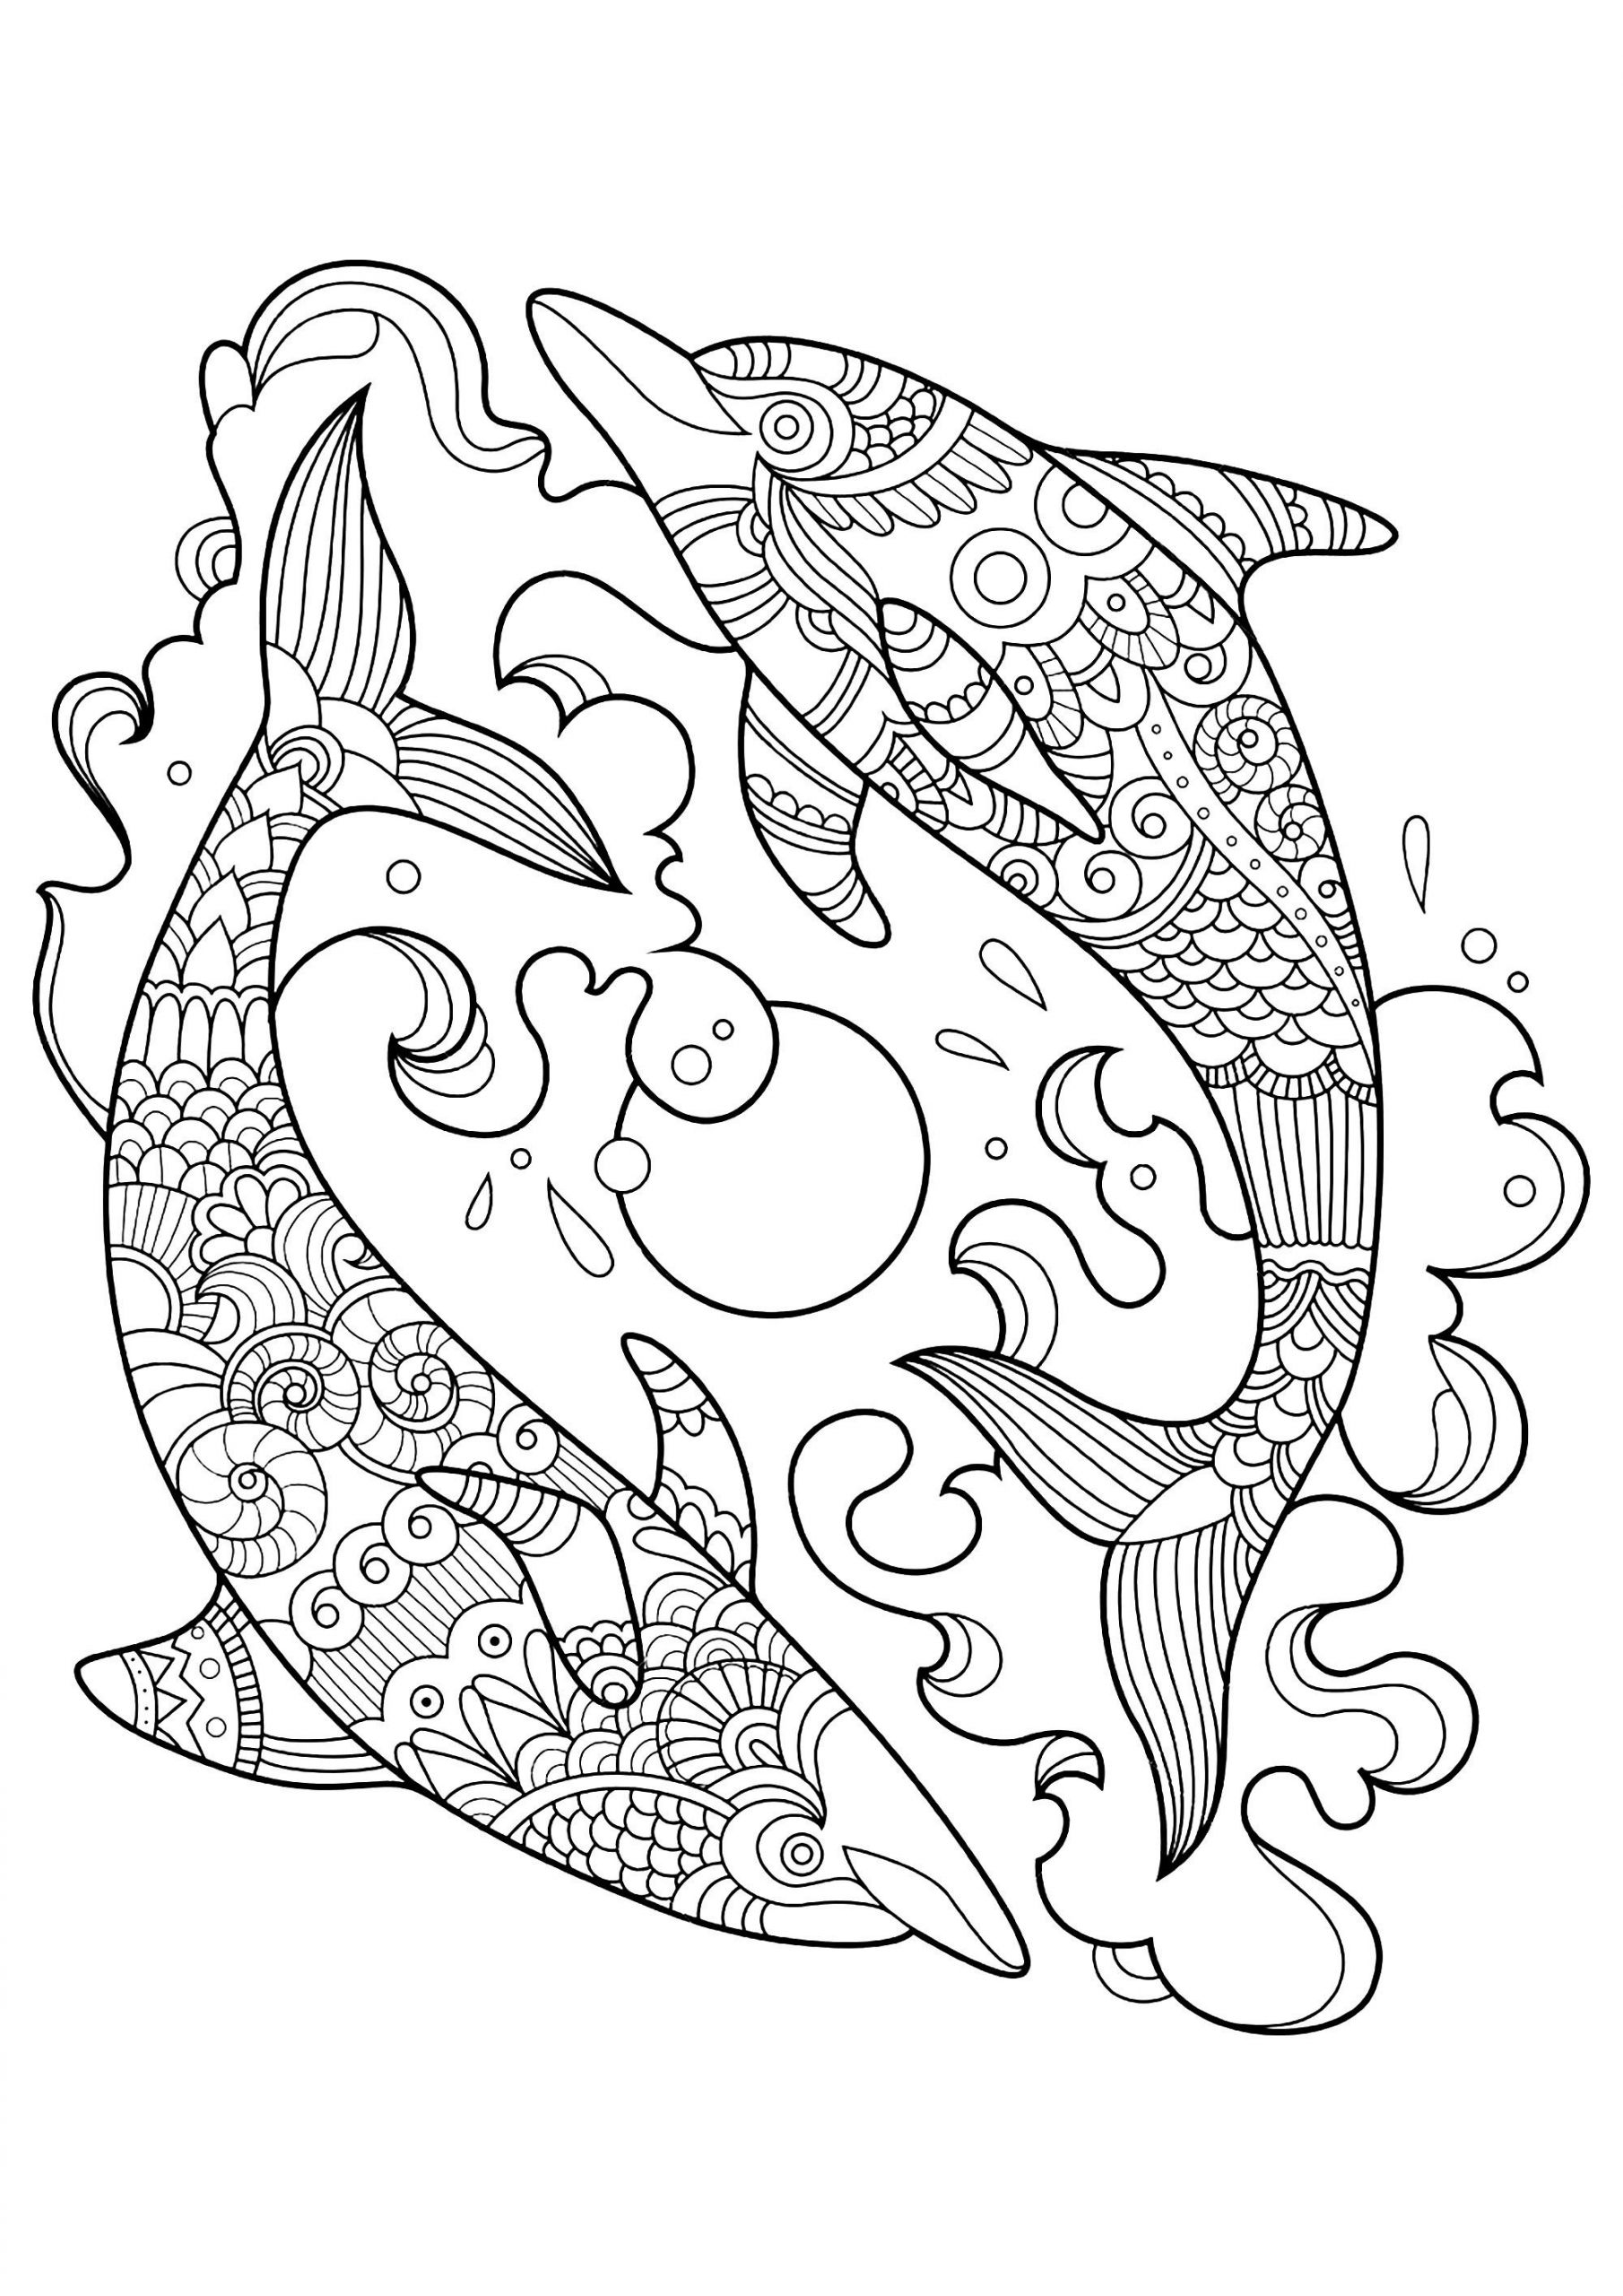 Dolphin Printable Coloring Pages
 Dolphins to color for children Dolphins Kids Coloring Pages